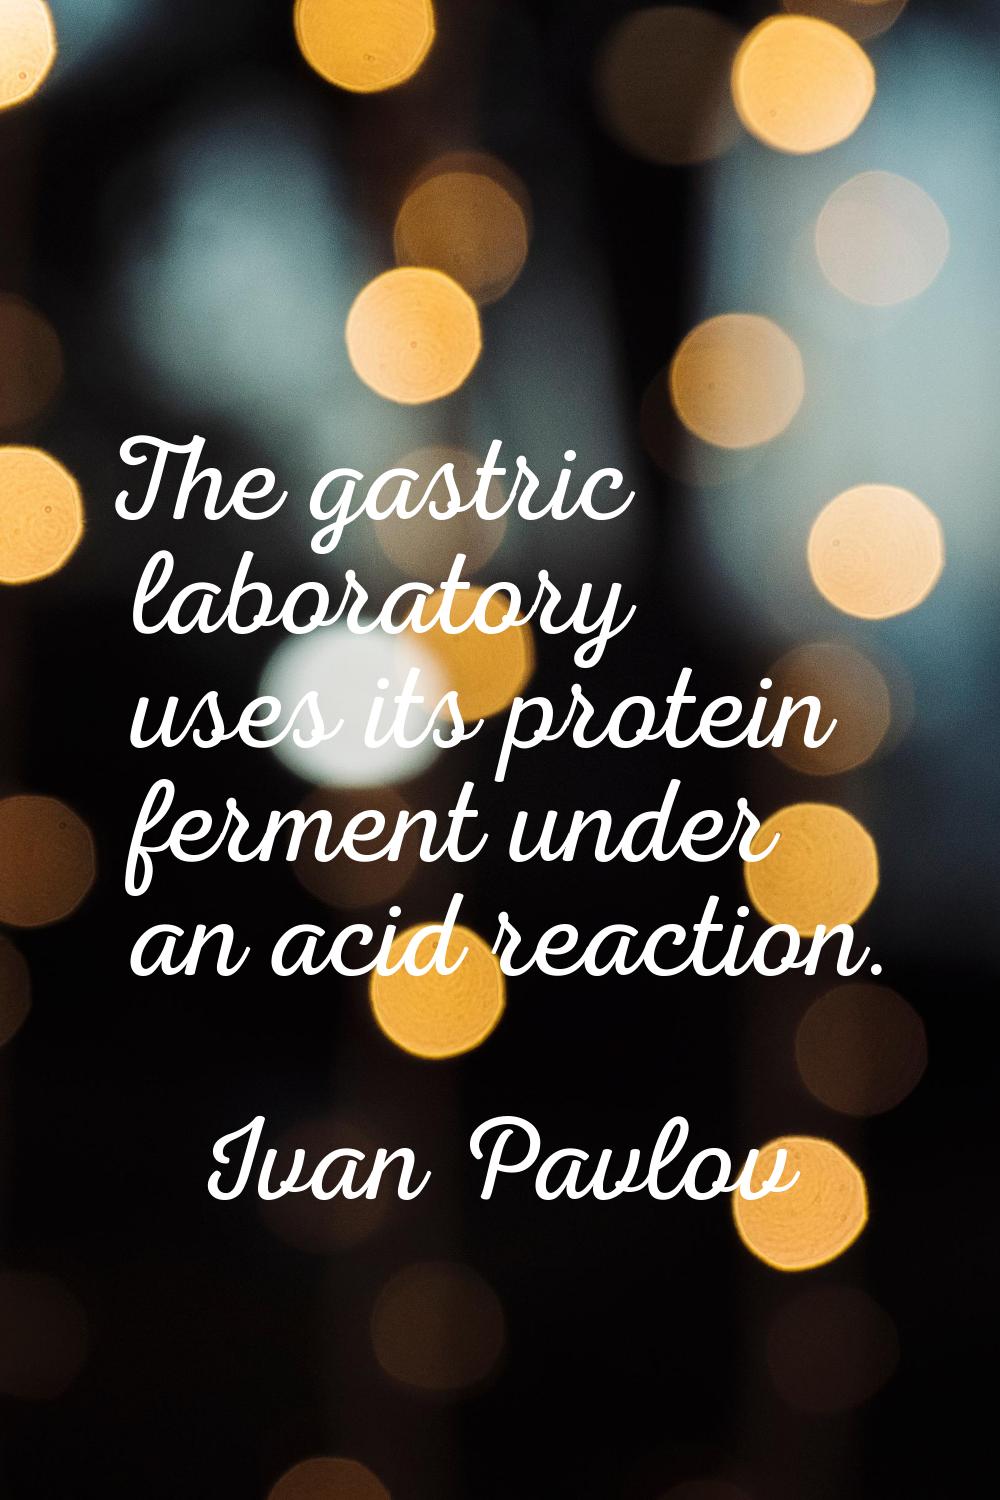 The gastric laboratory uses its protein ferment under an acid reaction.